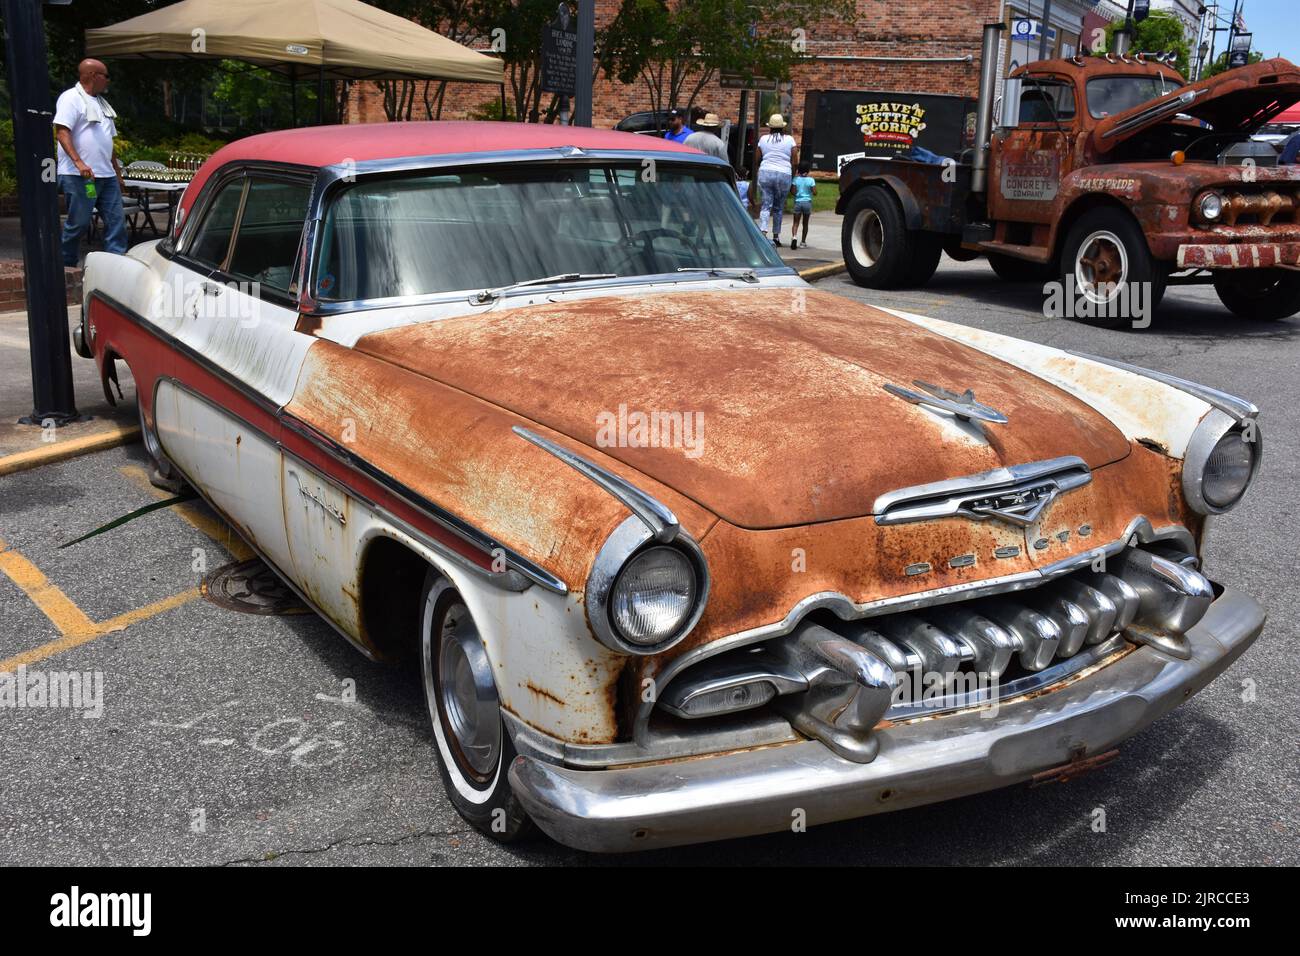 A vintage 1960s Desoto Fireflite on display at a car show. Stock Photo